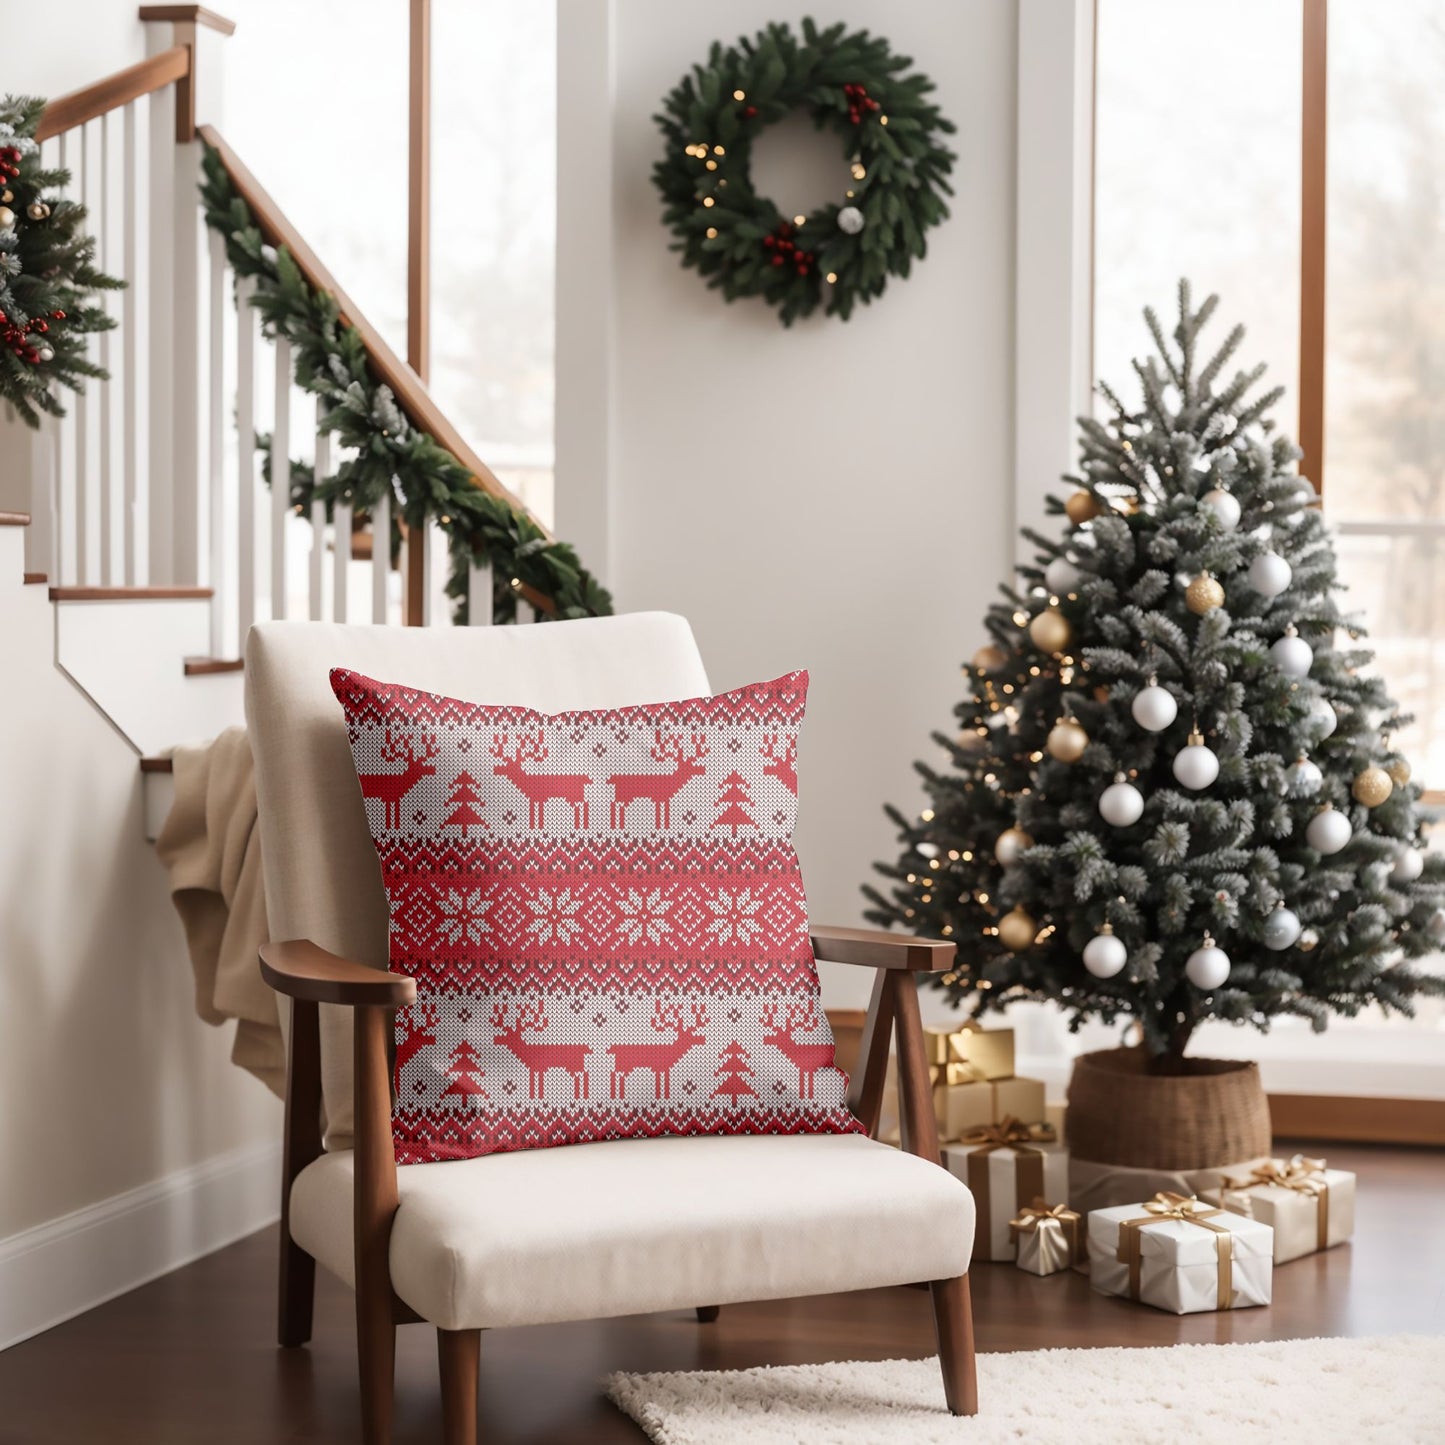 Detailed Close-up of Festive Red Reindeer Pattern Cushion